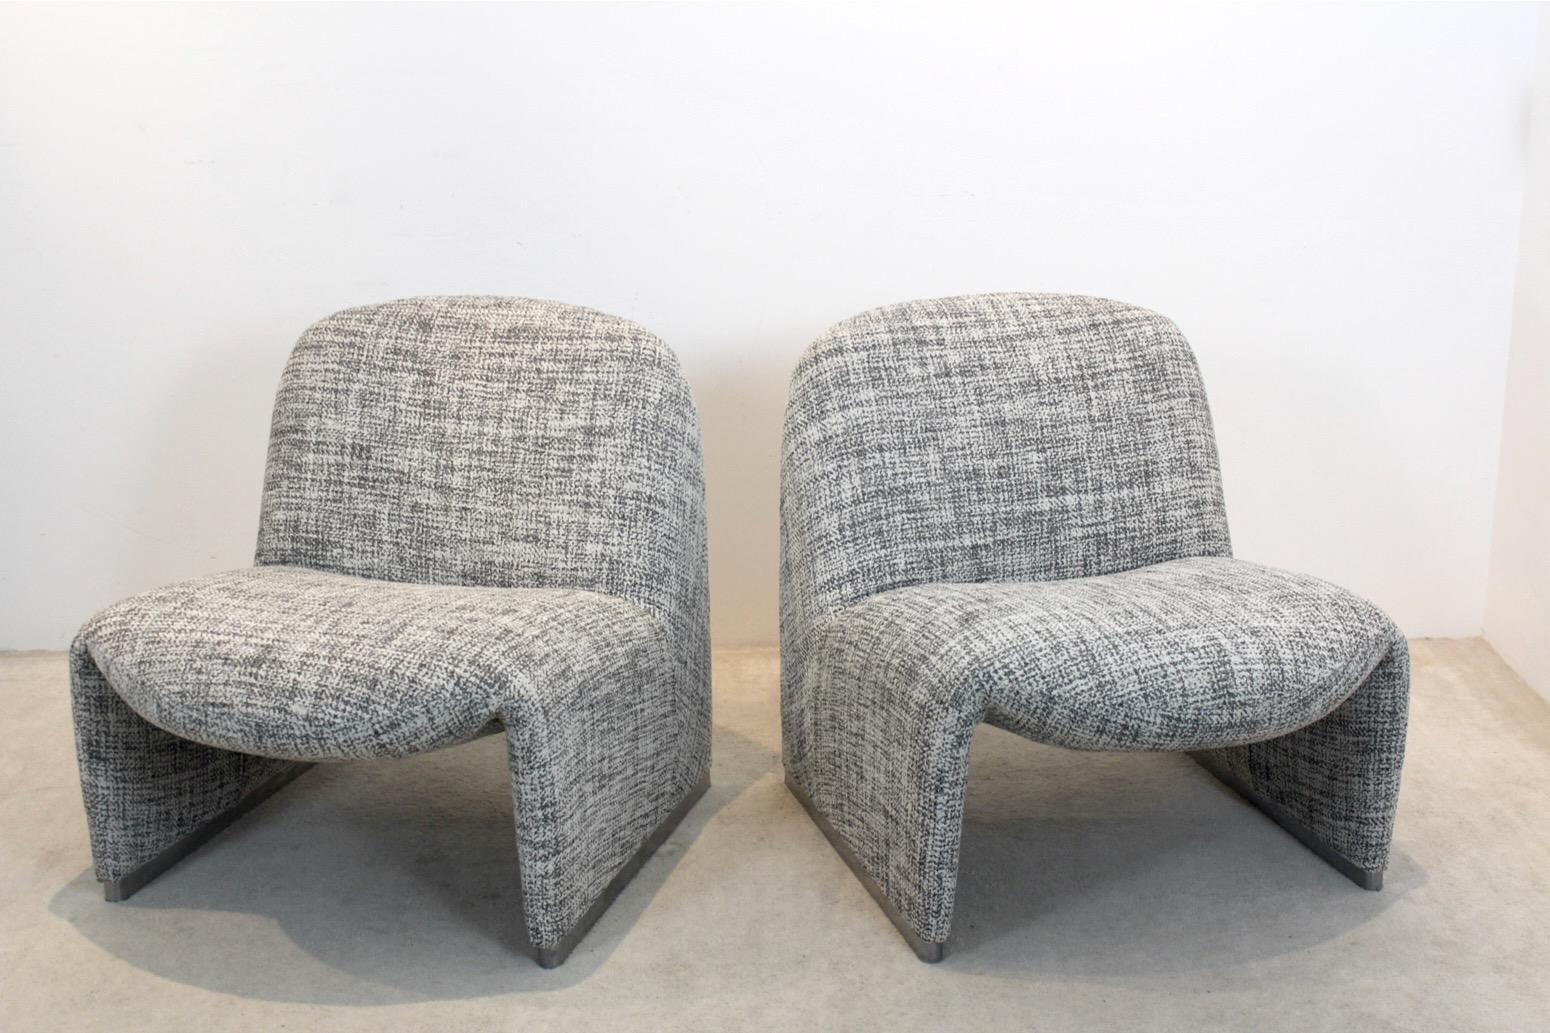 Exquisite Pair of Artifort Alky Chairs by Giancarlo Piretti For Sale 6